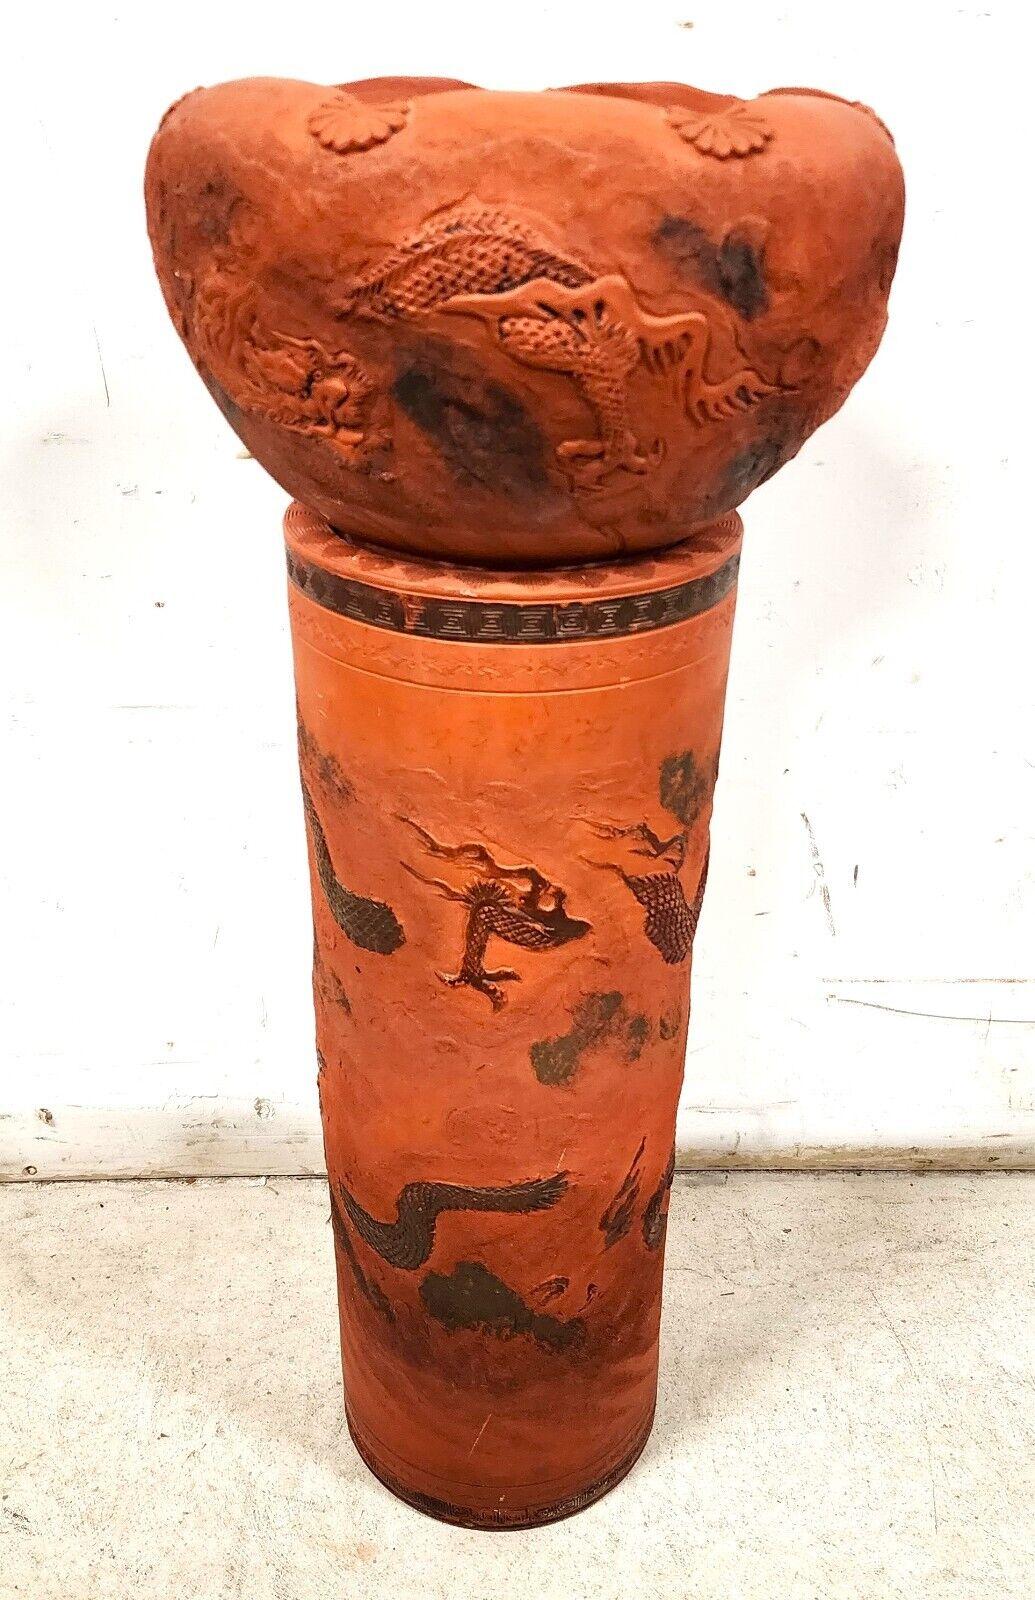 For FULL item description click on CONTINUE READING at the bottom of this page.

Offering One Of Our Recent Palm Beach Estate Fine Furniture Acquisitions Of An 
Antique Japanese Tokoname Late Meiji Period Redware Pottery Plant Stand
Rare to find